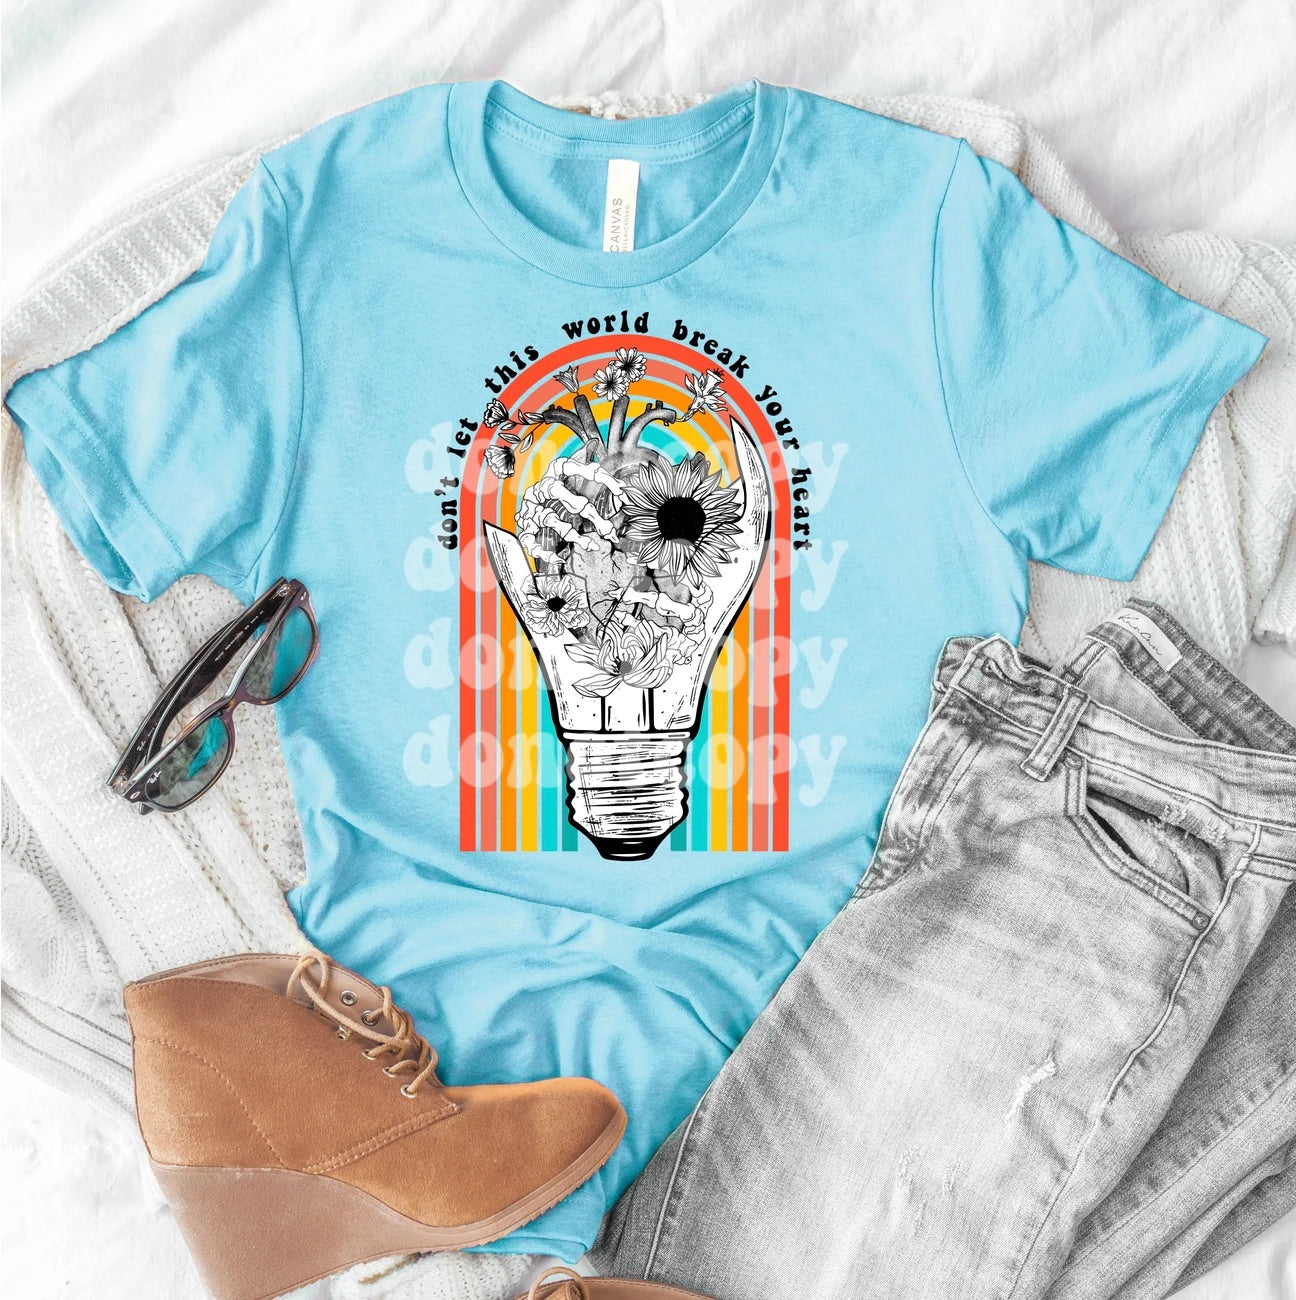 Don’t Let This World Break Your Heart Graphic Tee - Bella Lia Boutique